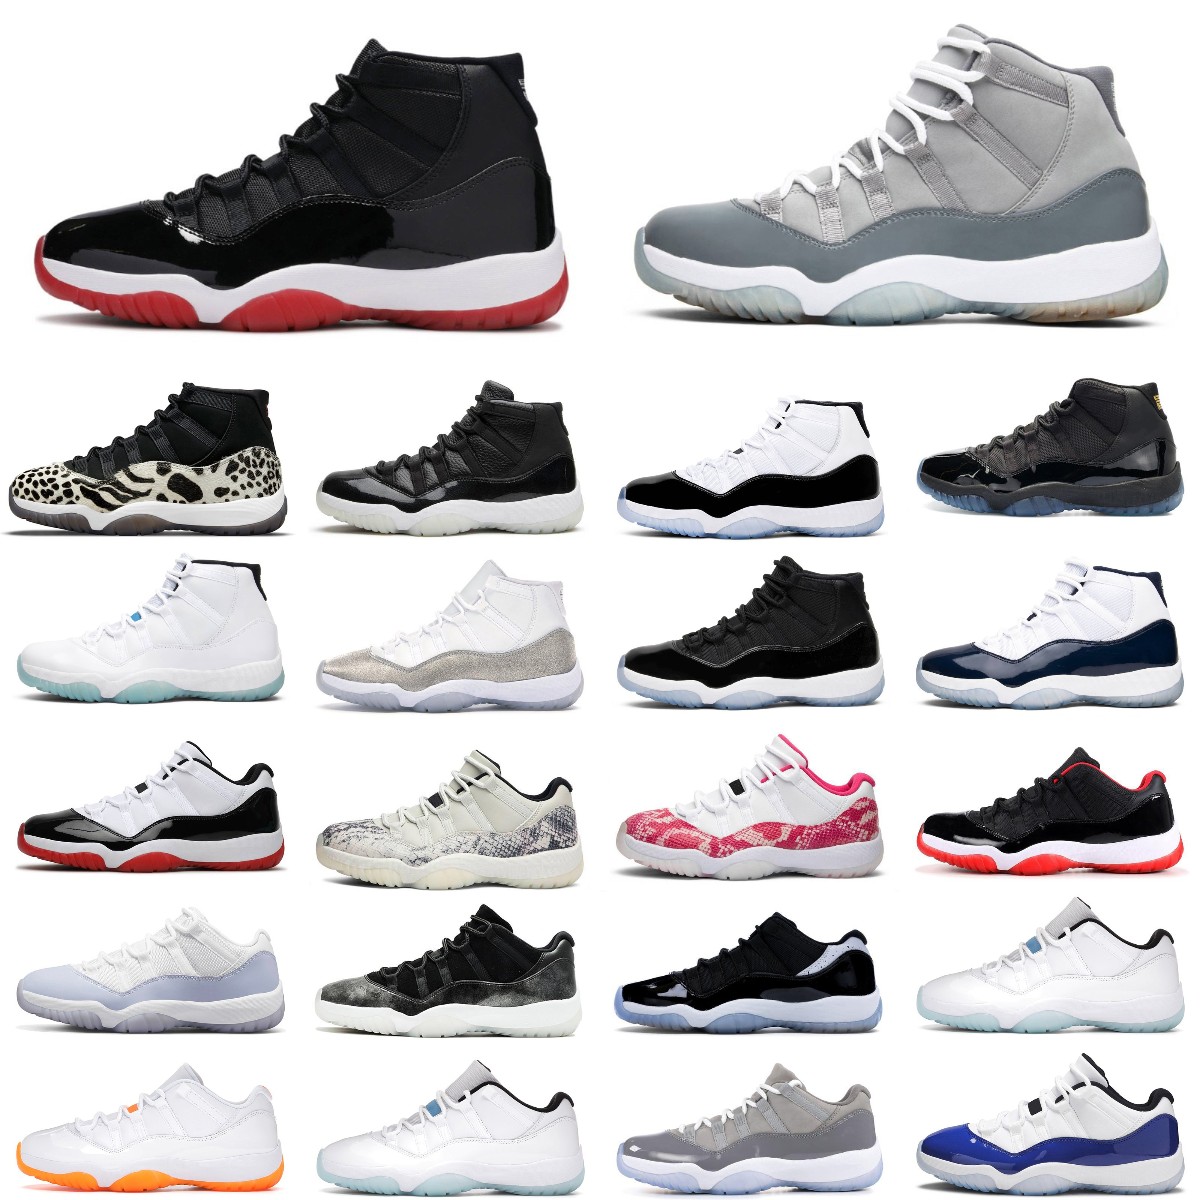 New 11 11s Basketball Shoes Man Woman Mens Sneakers Space Jam Cap and Gown High Concord Platinum Tint Barons 25th Anniversary Low White Bred Men women Trainers